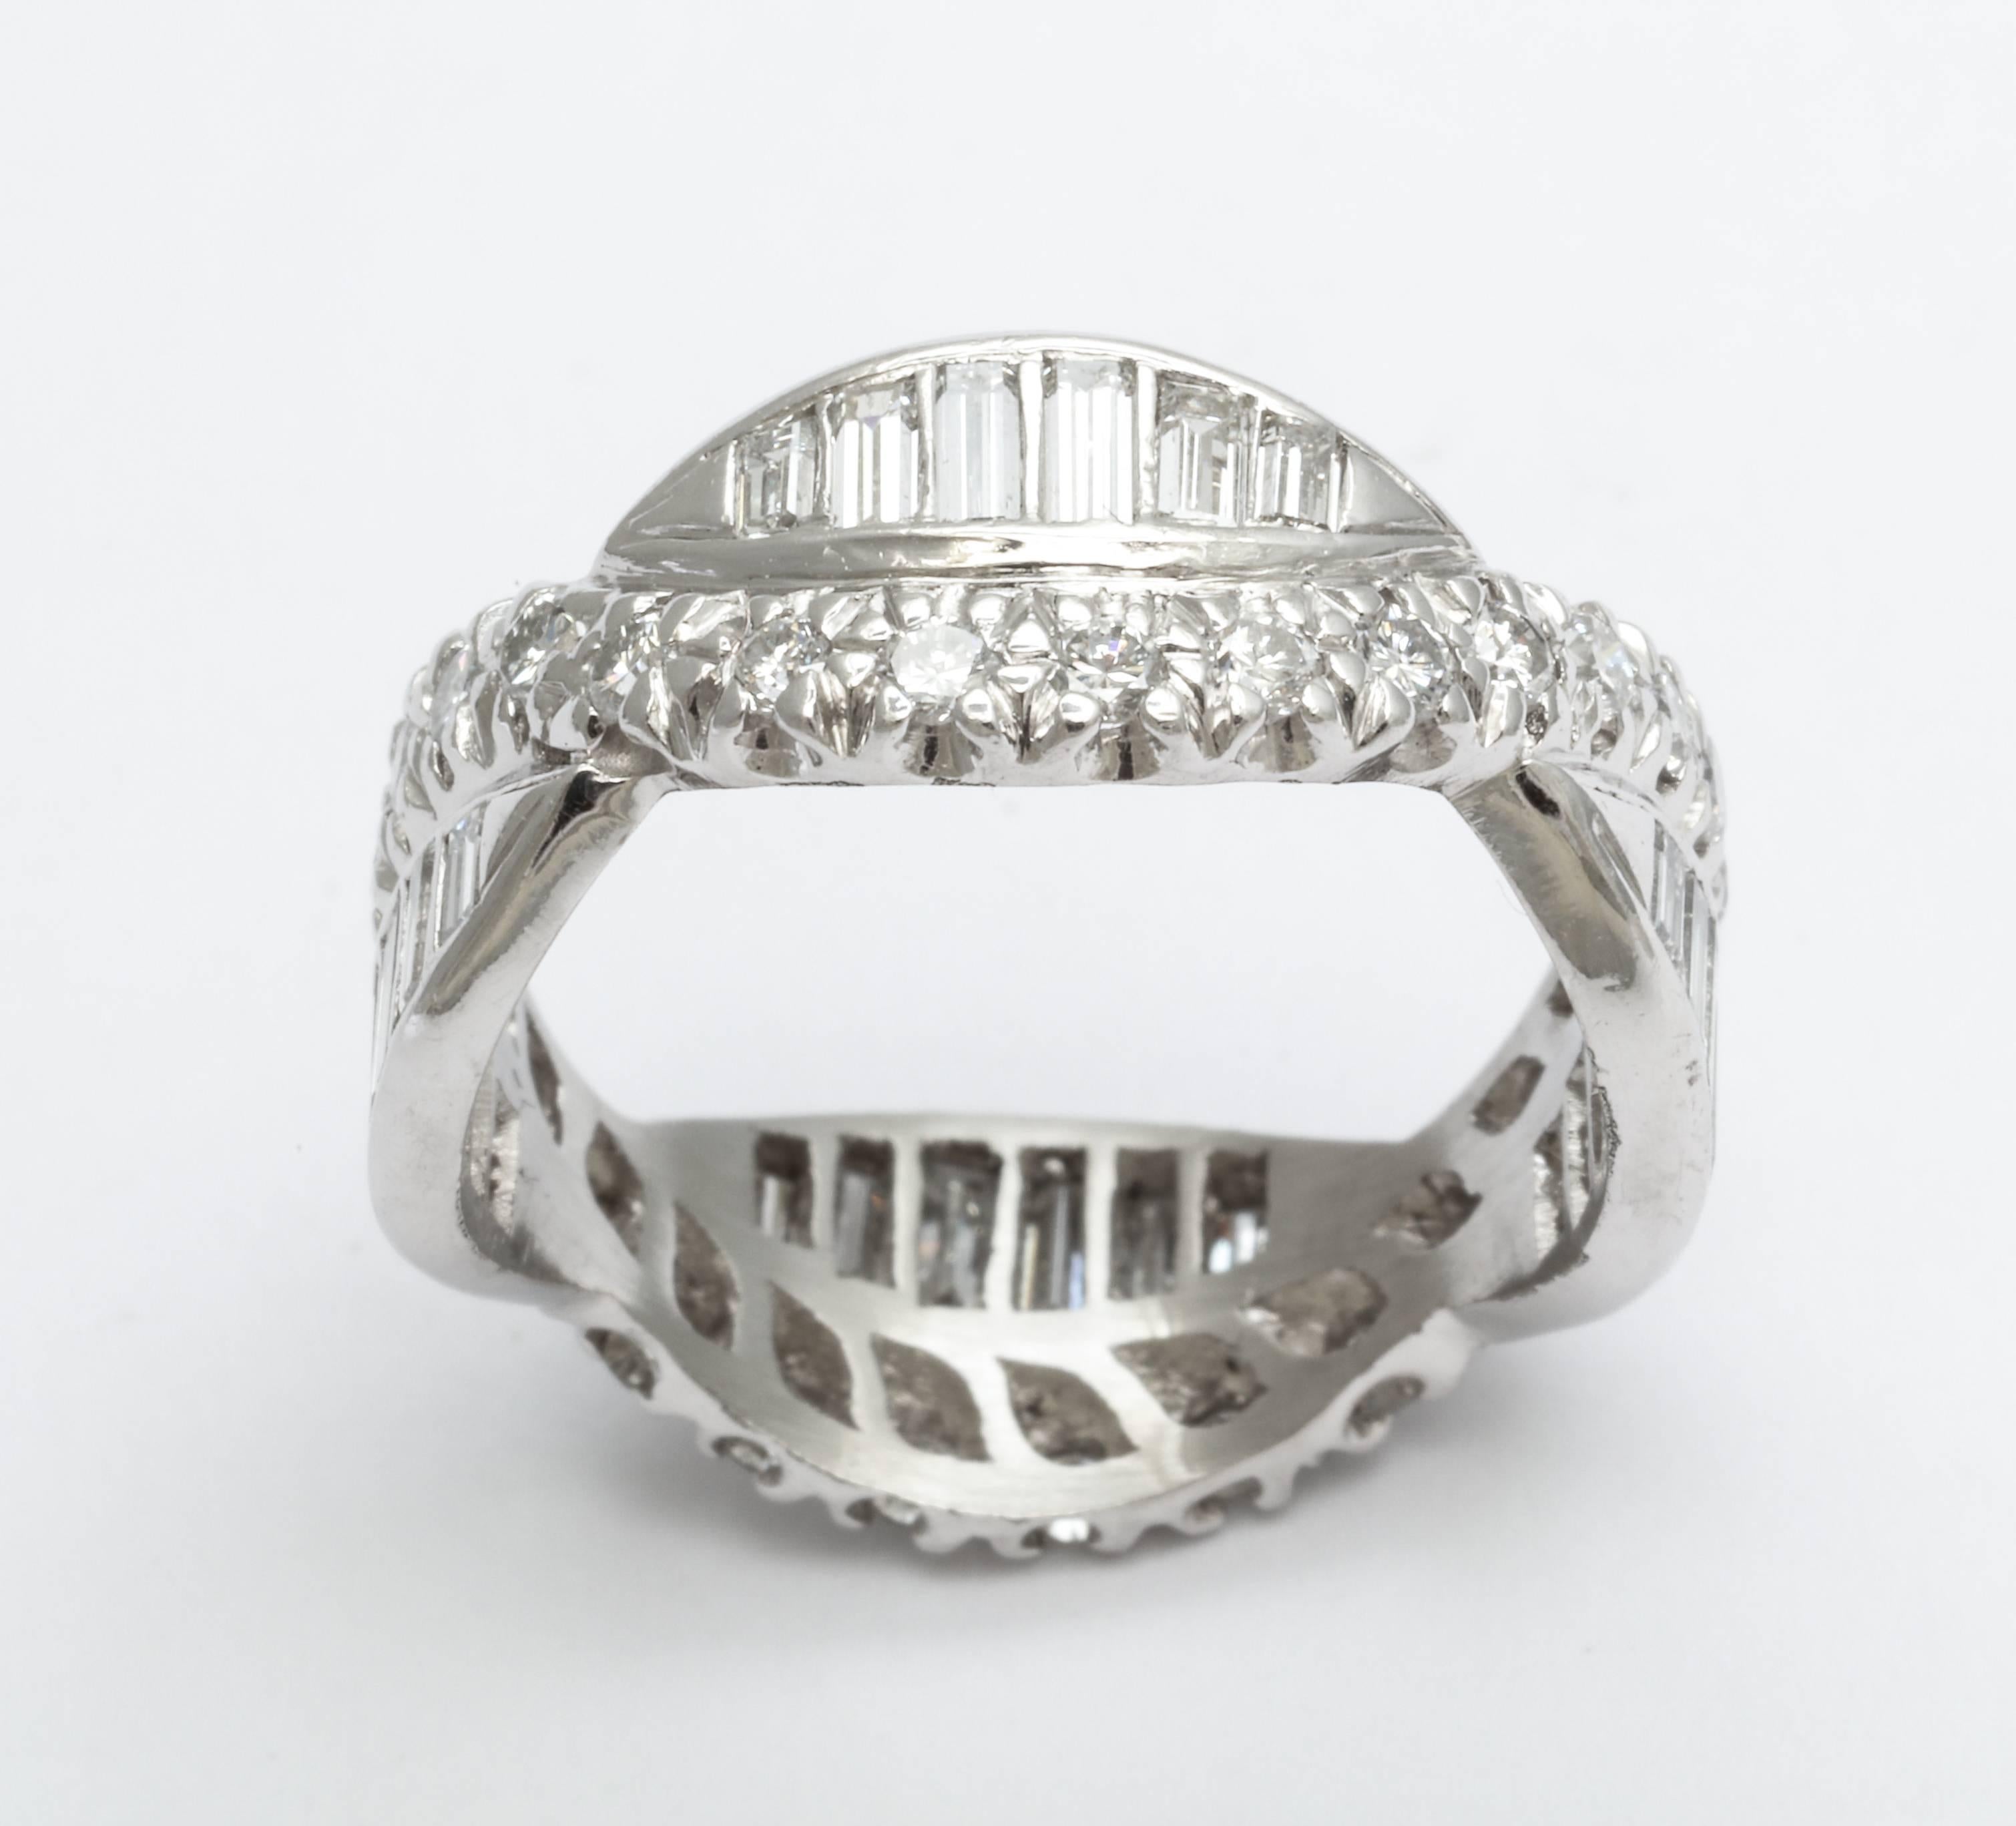 An elegant period Art Deco eternity band woven form with diamond baguettes and chips set in platinum. Measures: Its ring size is 5 3/4.